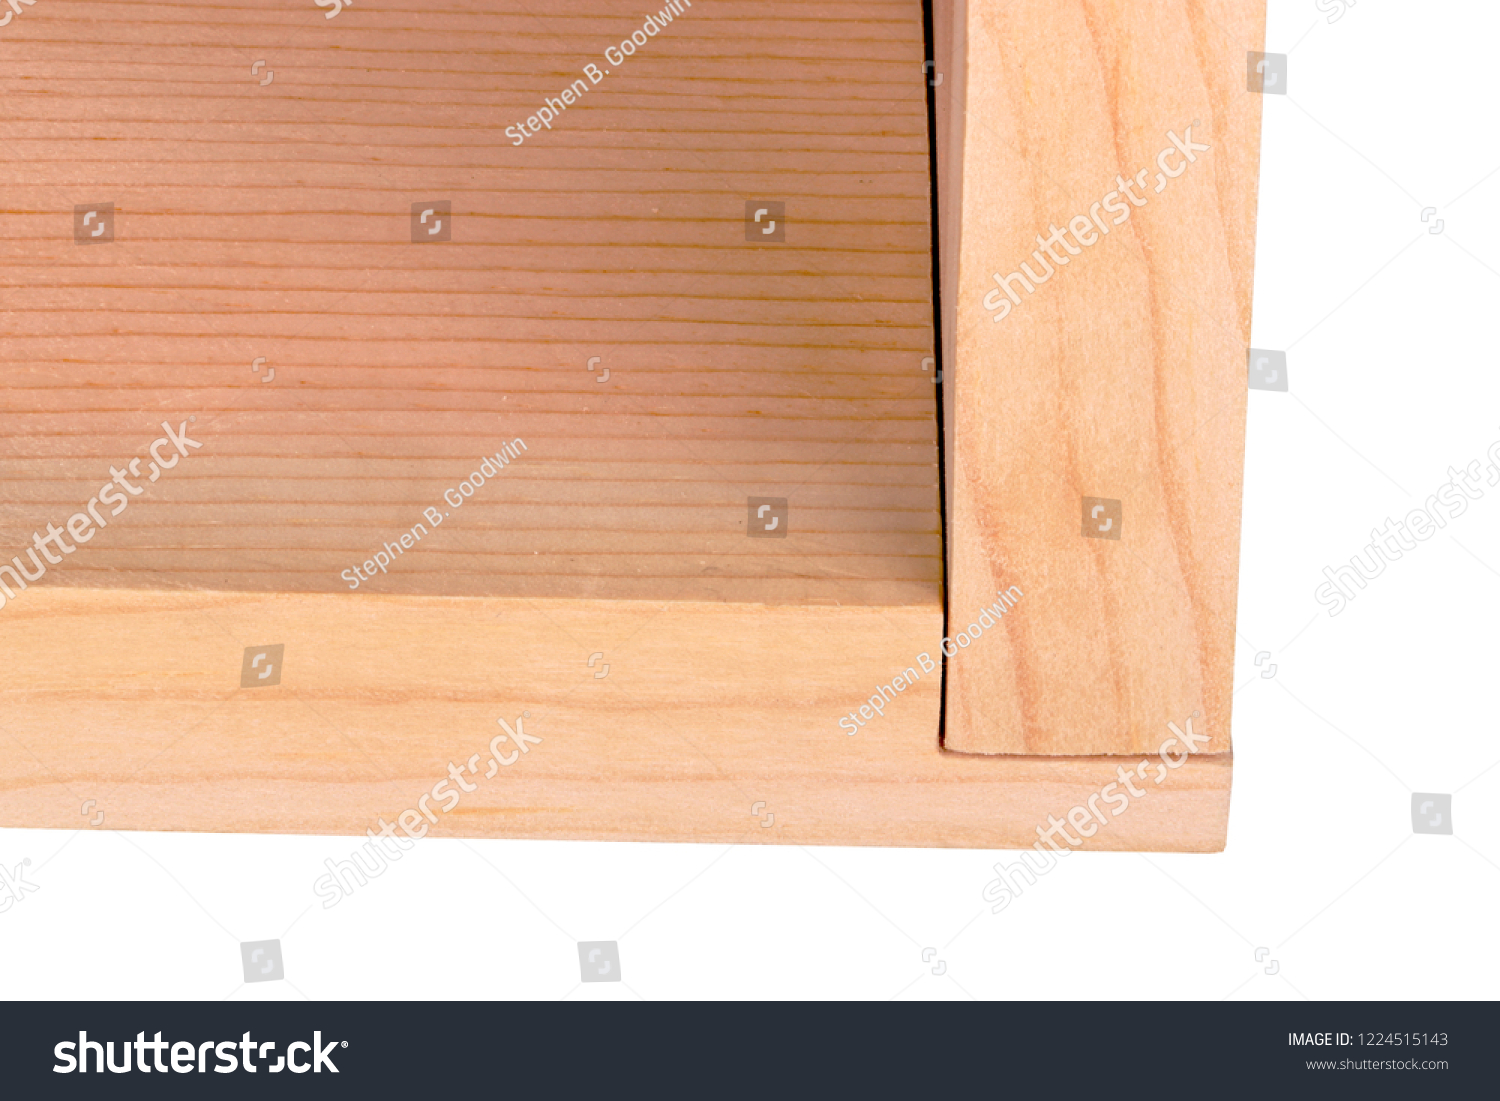 closeup-two-boards-forming-woodworking-rabbet-stock-photo-1224515143